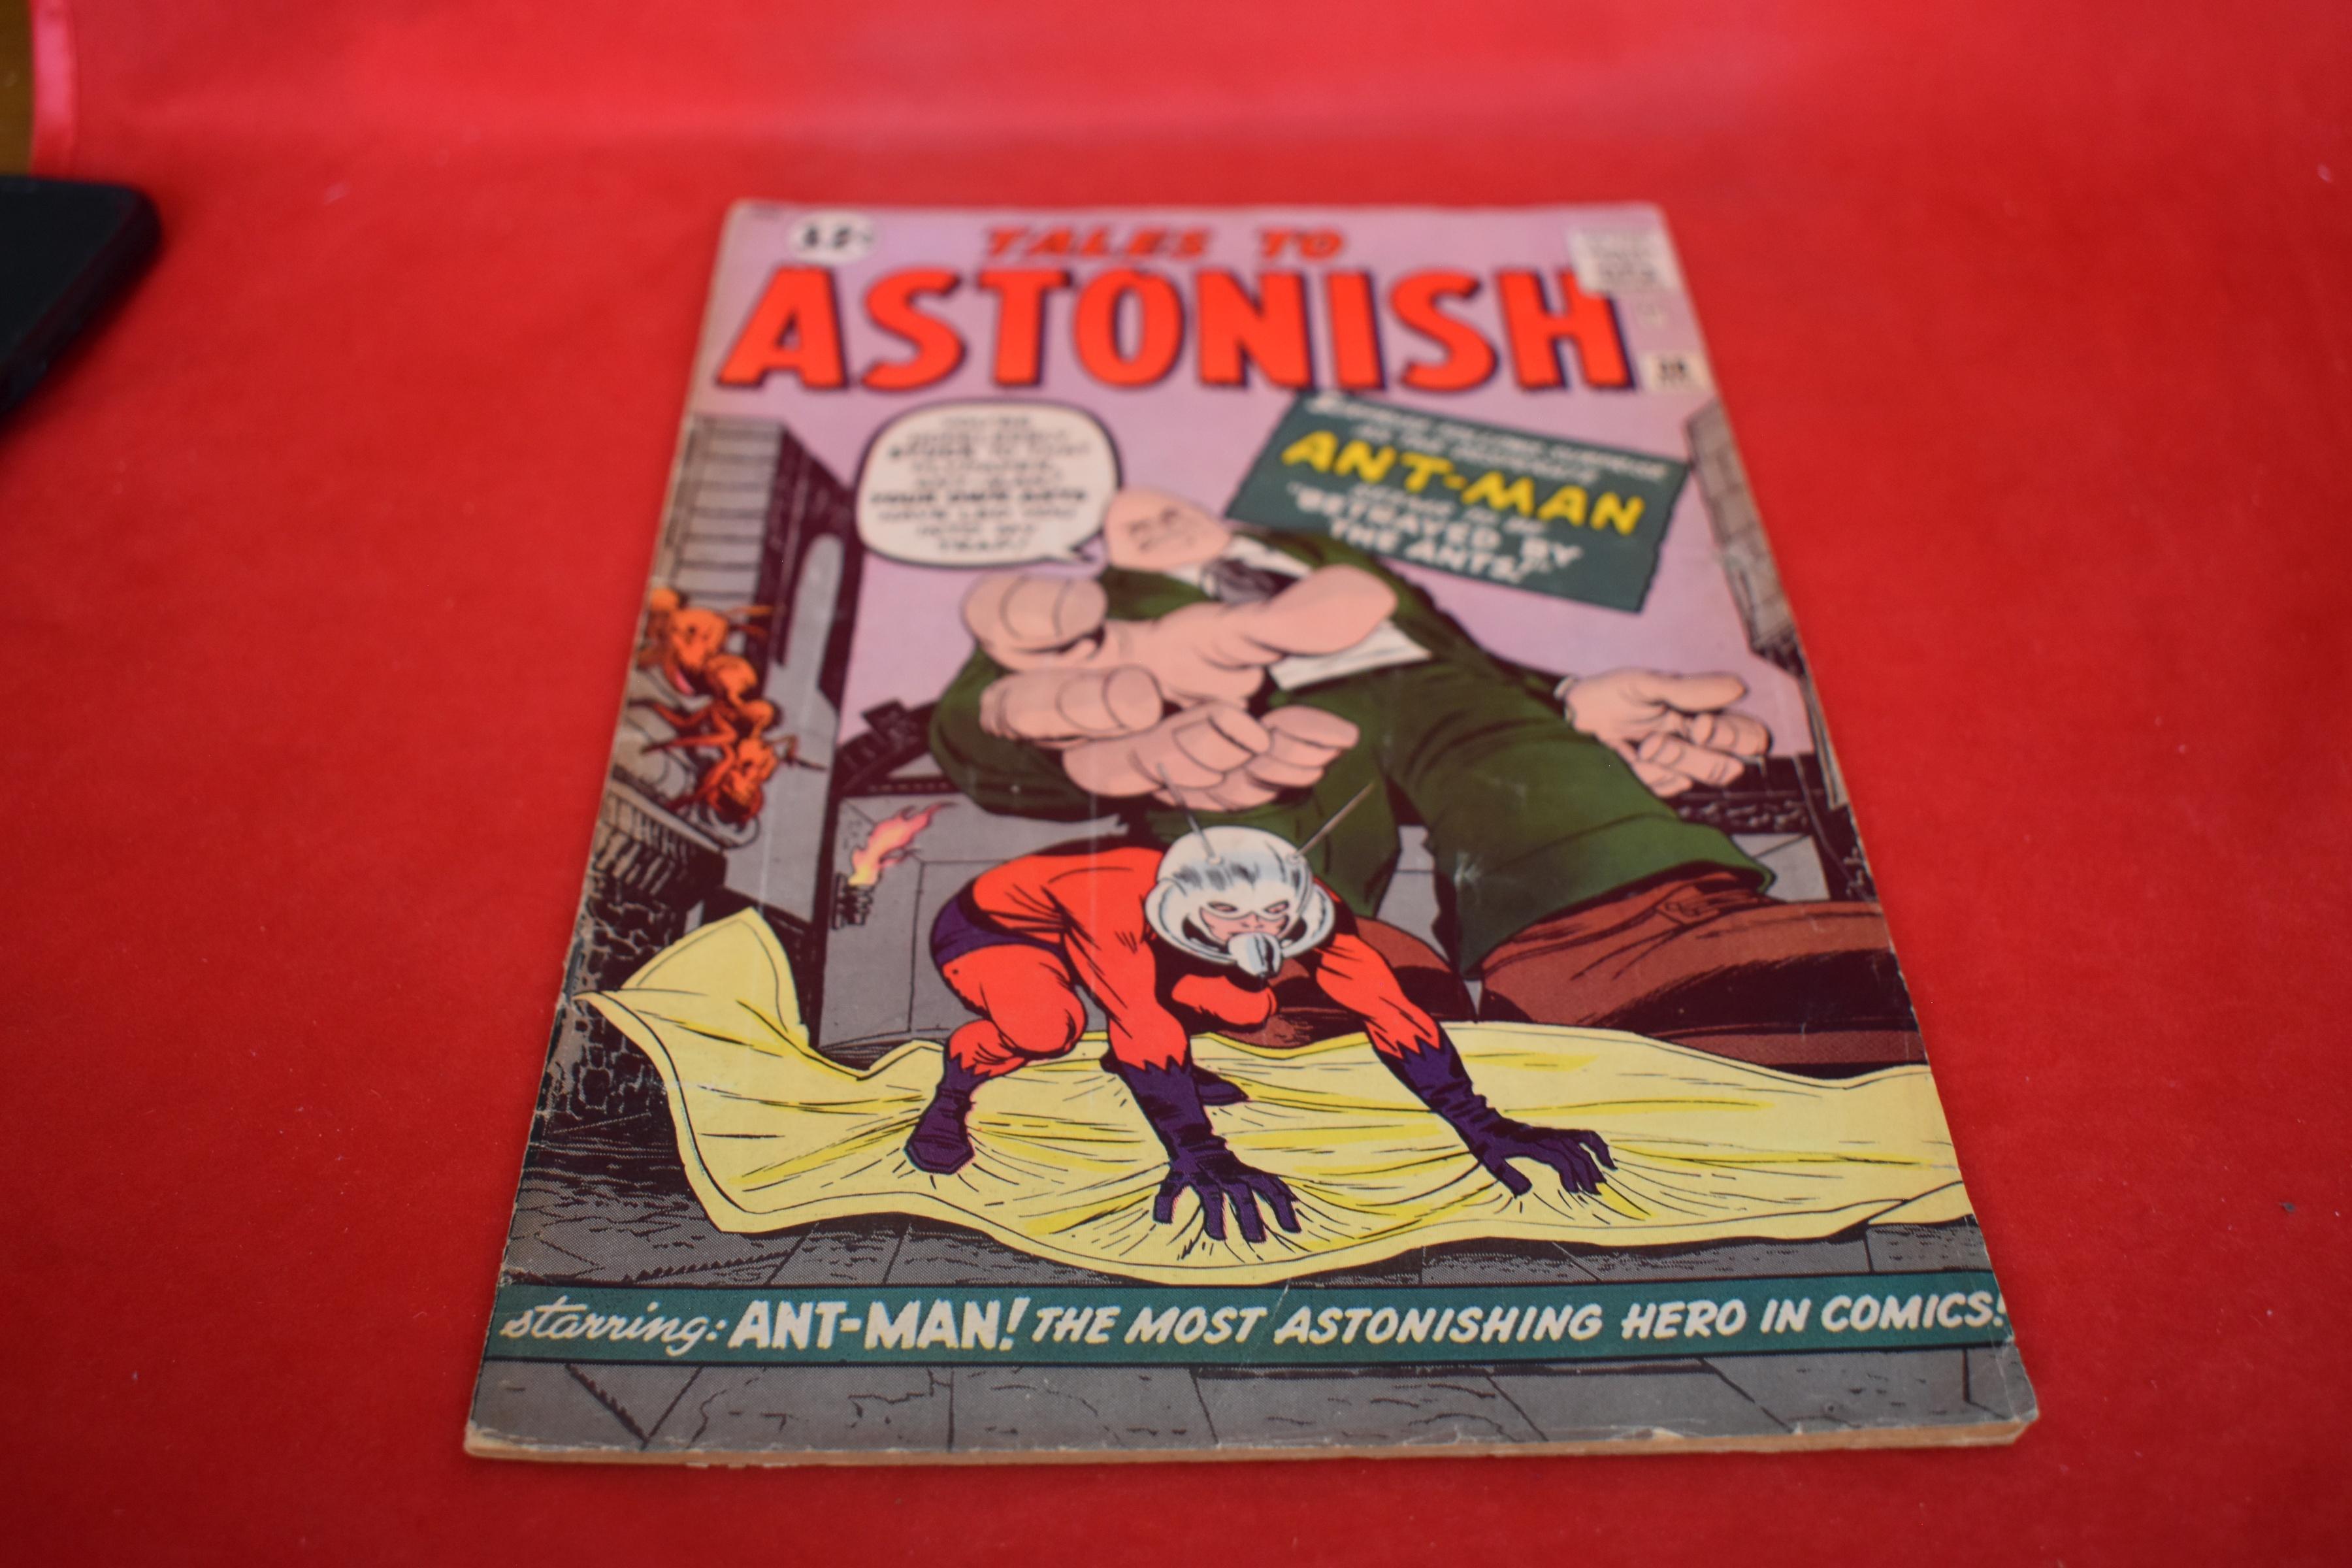 TALES TO ASTONISH #38 | KEY 1ST APP OF EGGHEAD, 4TH APP OF ANT-MAN! | LEE & KIRBY - 1962 - SOLID!